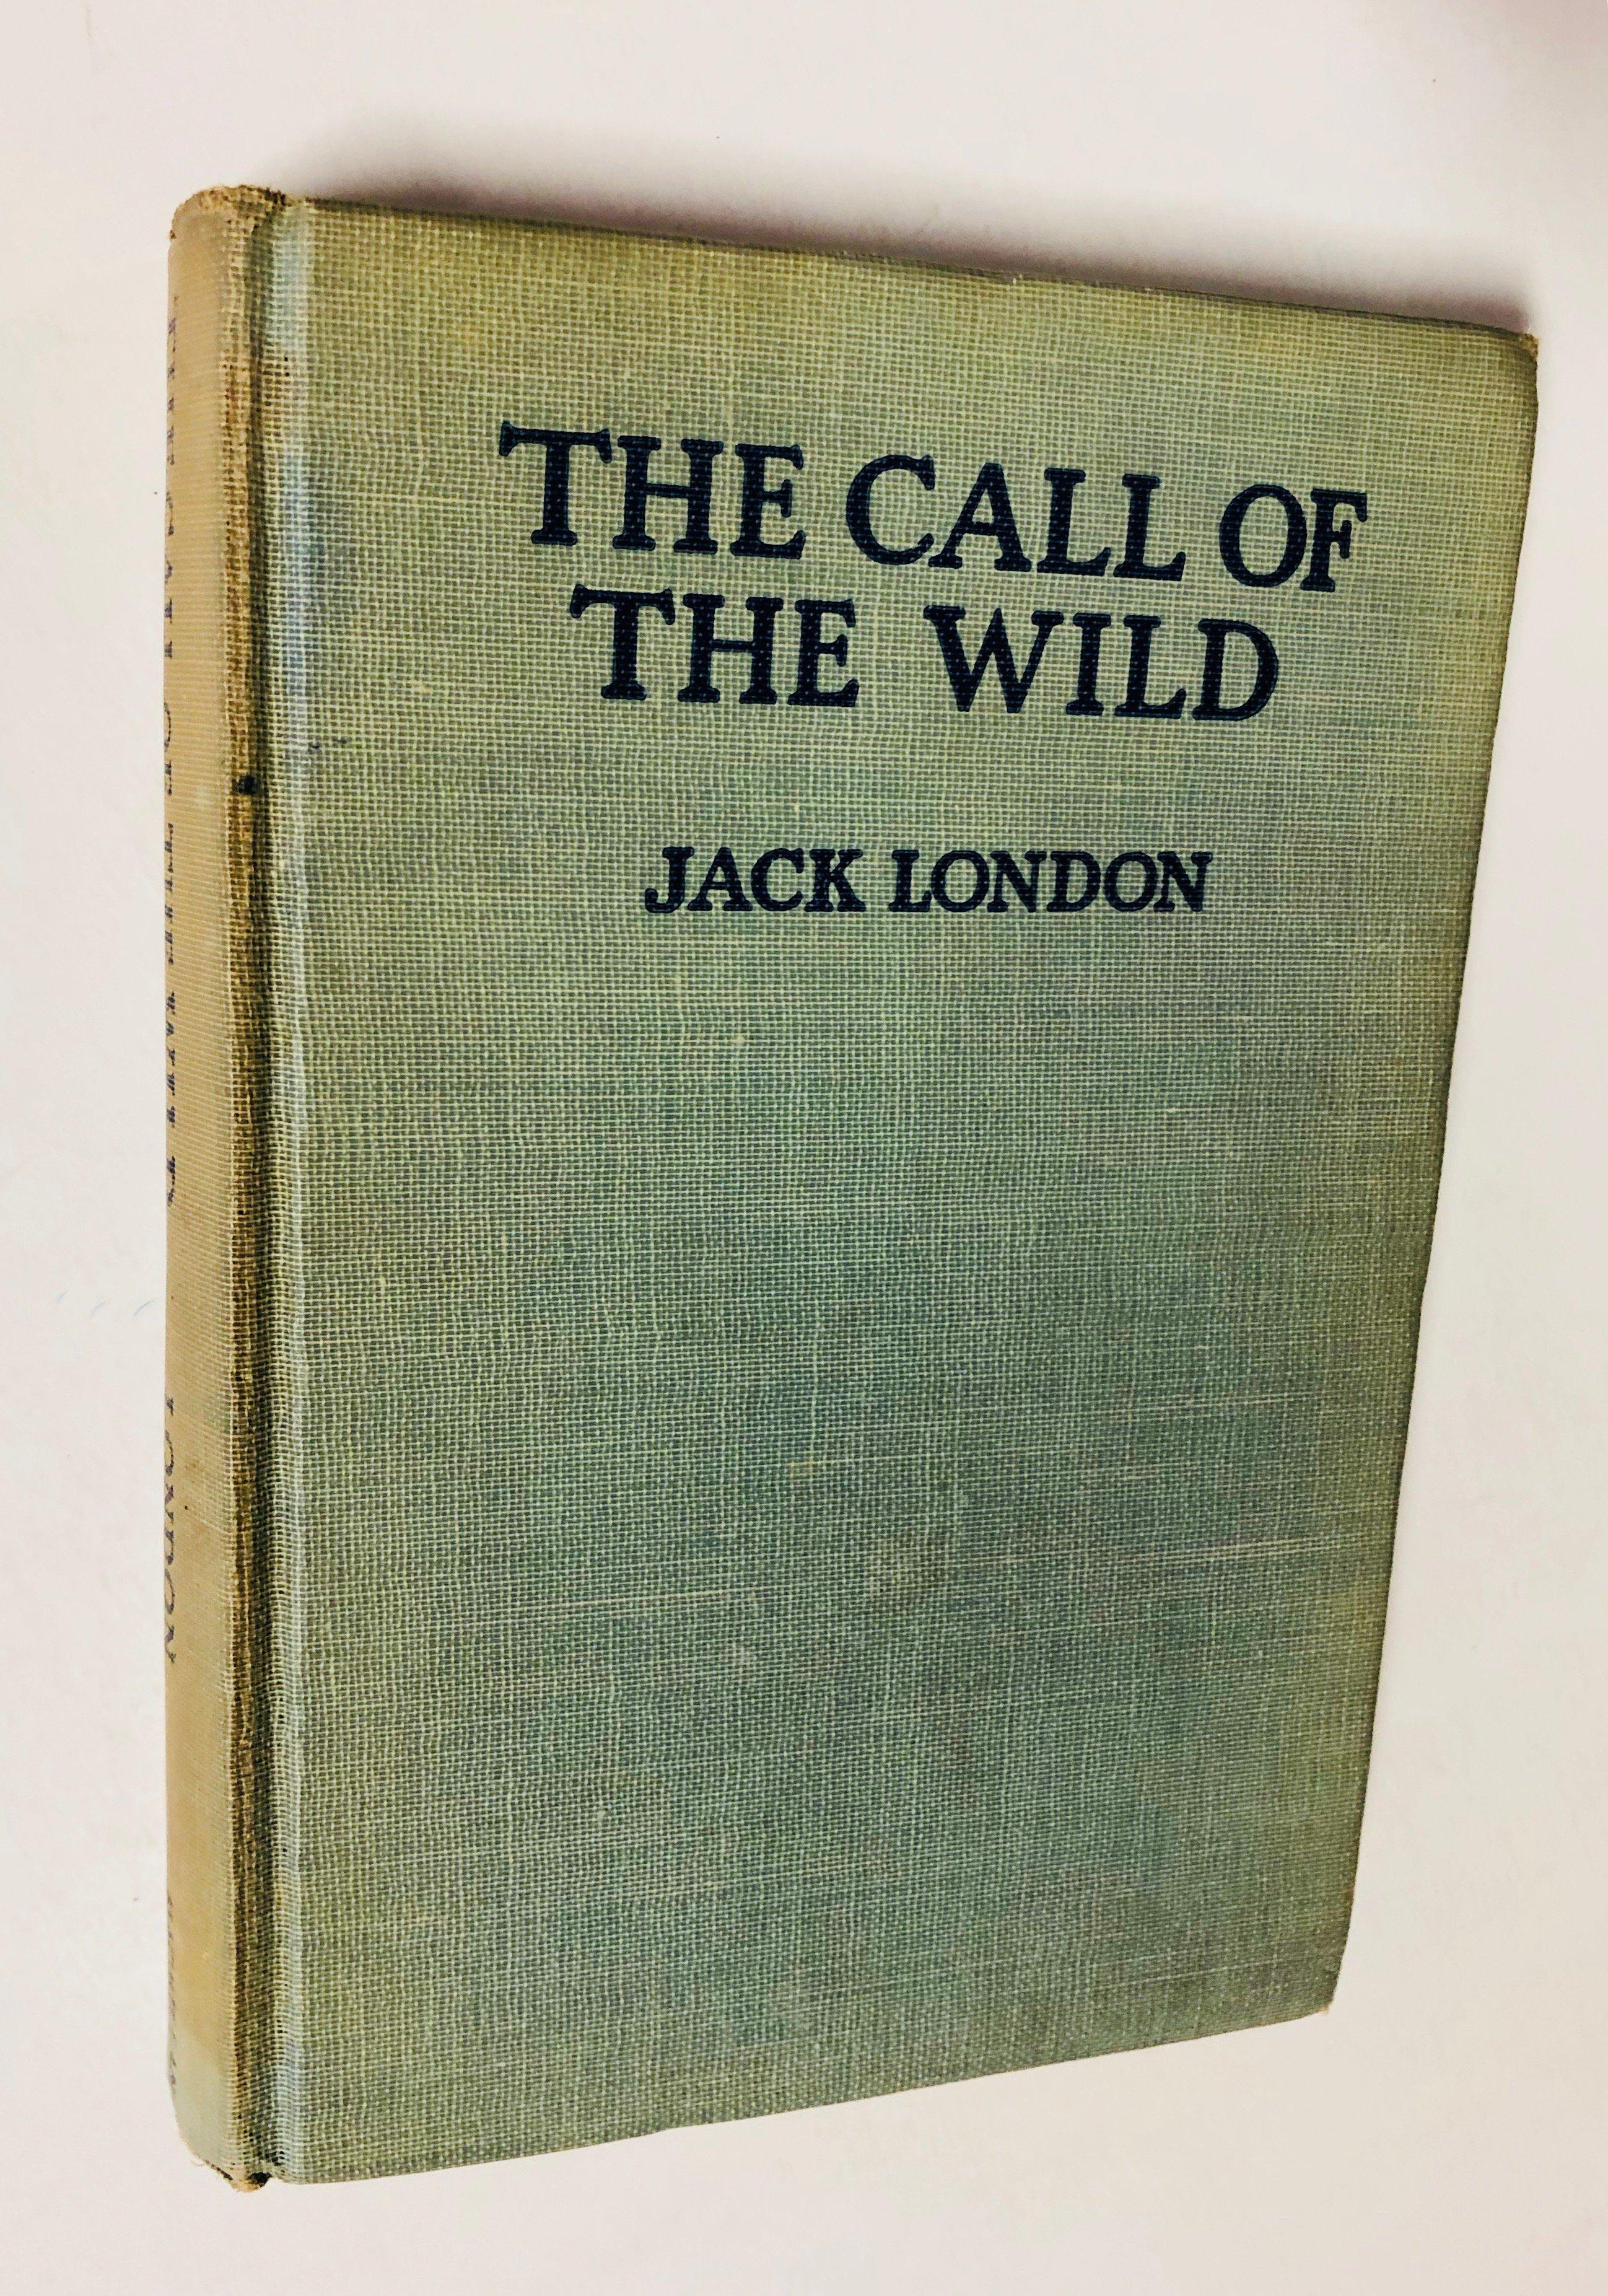 TWO COPIES of Call of the Wild by Jack London - Portland Illustrated Classics - MacMillan (1945)